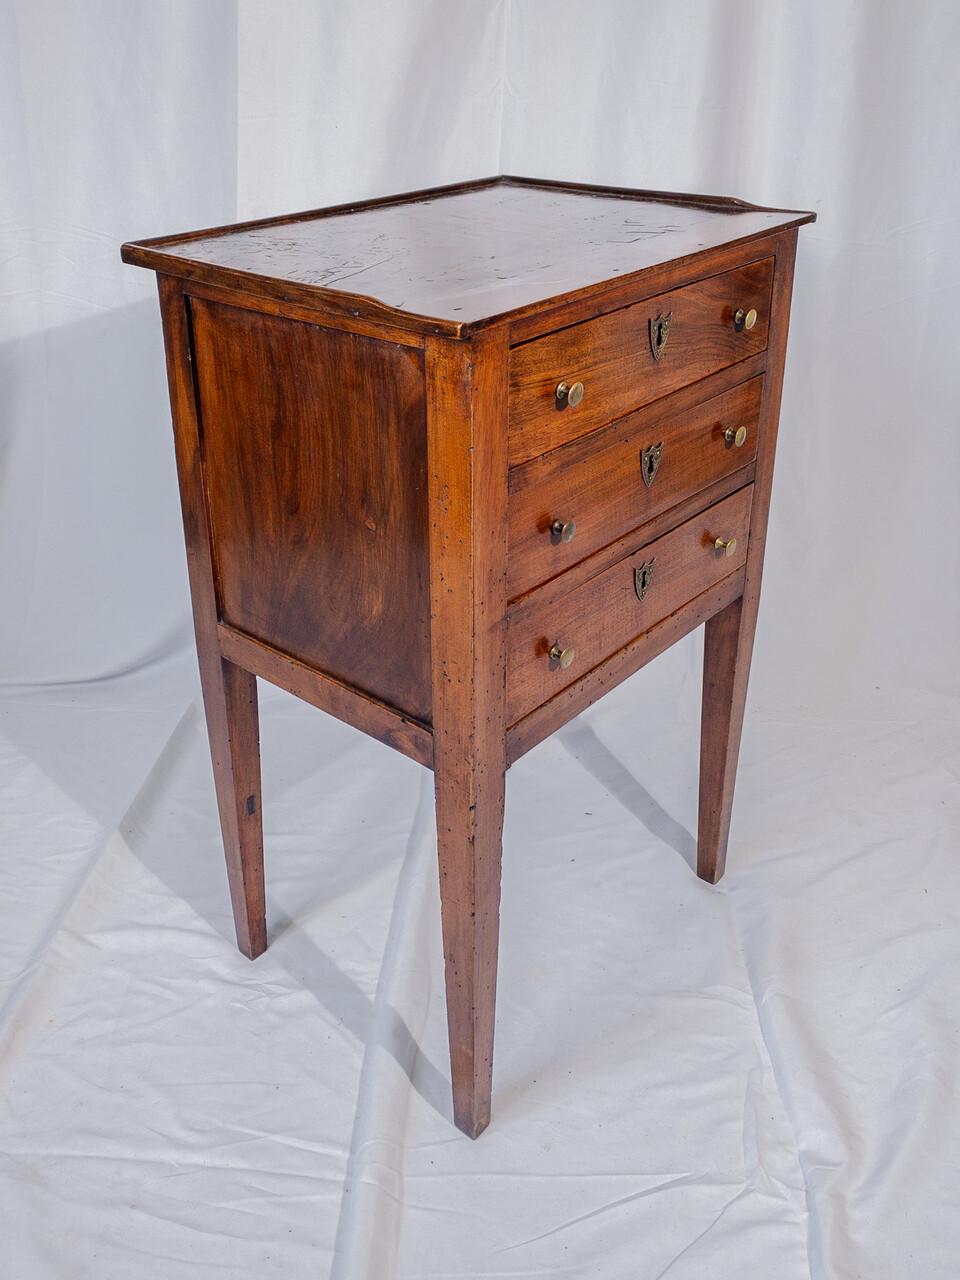 This elegant 19th-century French side table exudes timeless charm with its rich walnut wood and intricate craftsmanship. Standing gracefully on slender legs, it features three spacious drawers adorned with delicate brass handles, offering both